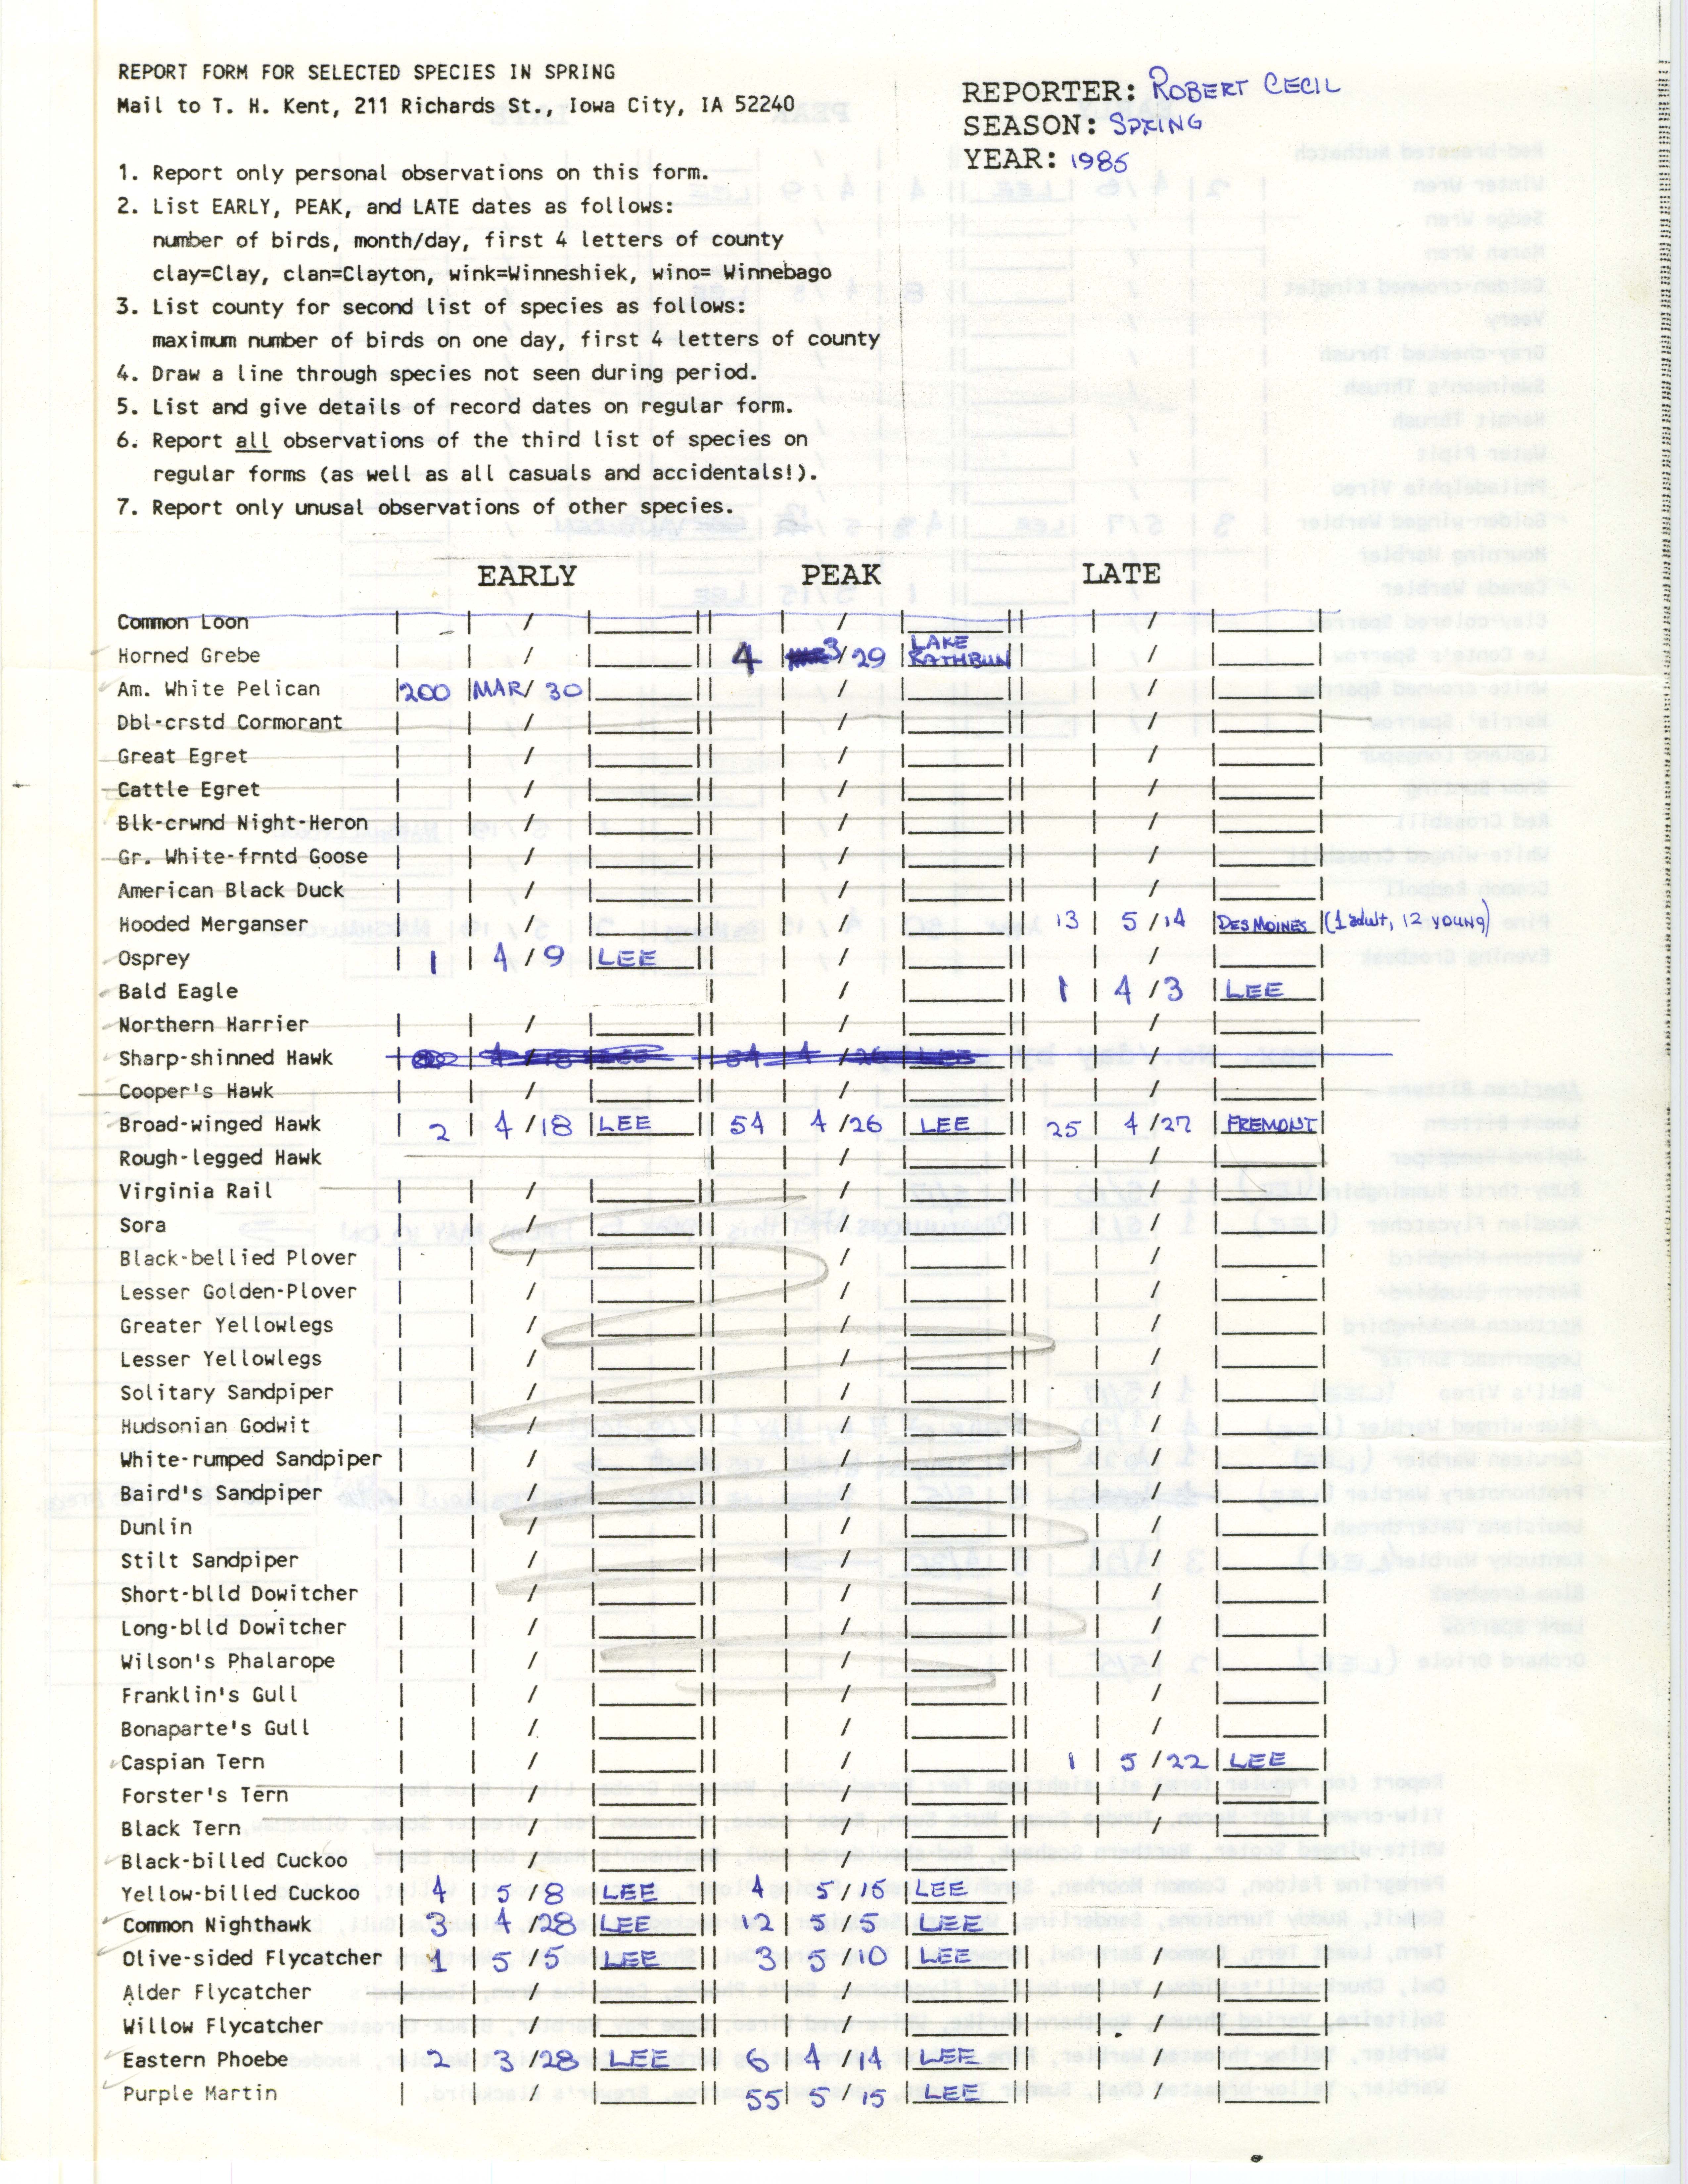 Report form for selected species in spring, contributed by Robert Cecil, spring 1985